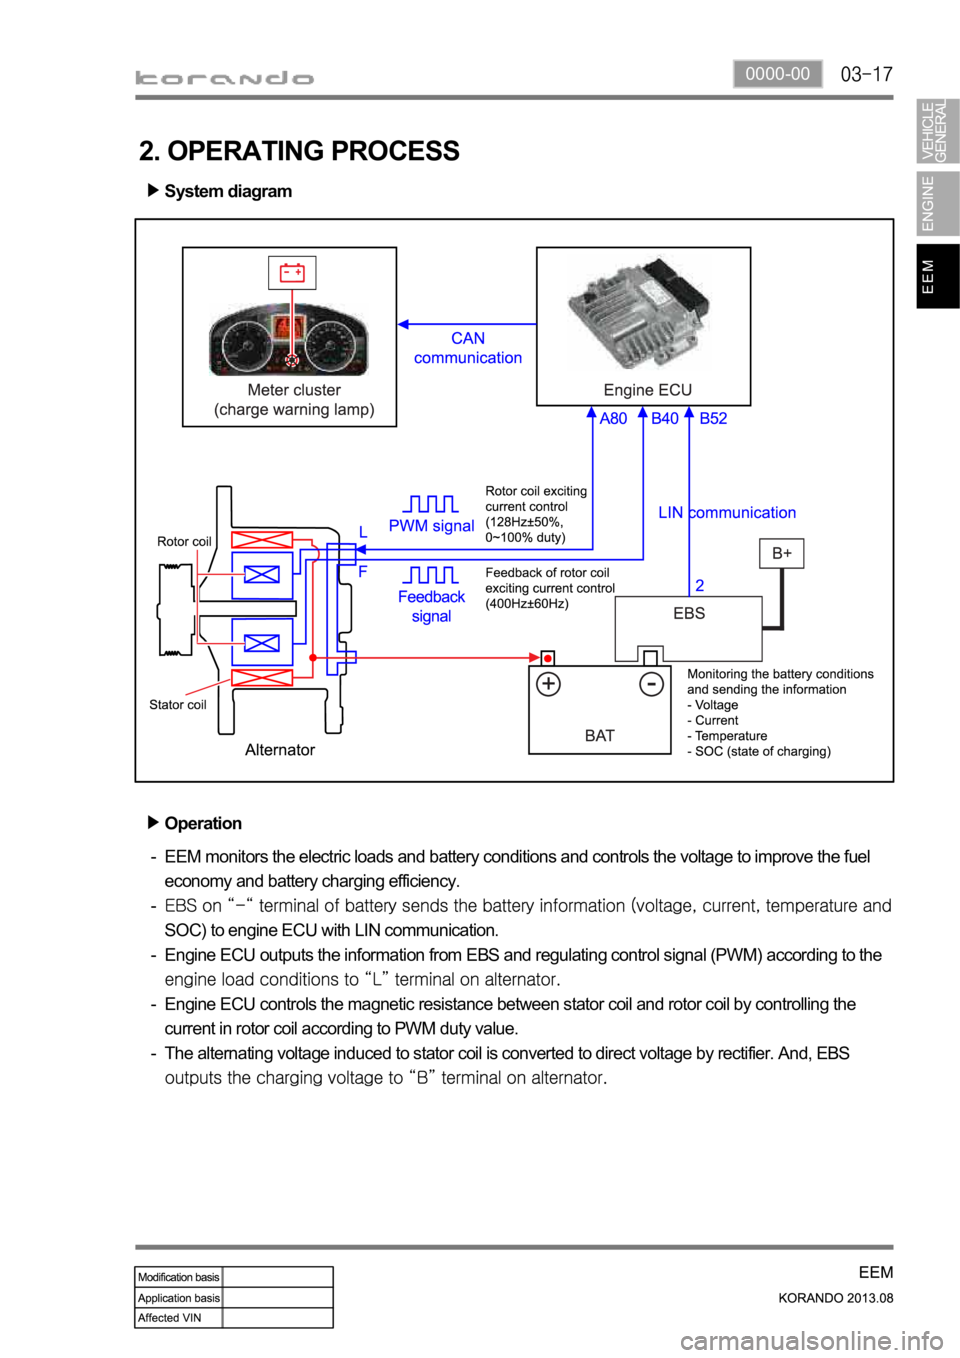 SSANGYONG KORANDO 2013  Service Manual 0000-00
2. OPERATING PROCESS
System diagram
Operation
EEM monitors the electric loads and battery conditions and controls the voltage to improve the fuel 
economy and battery charging efficiency.
SOC)